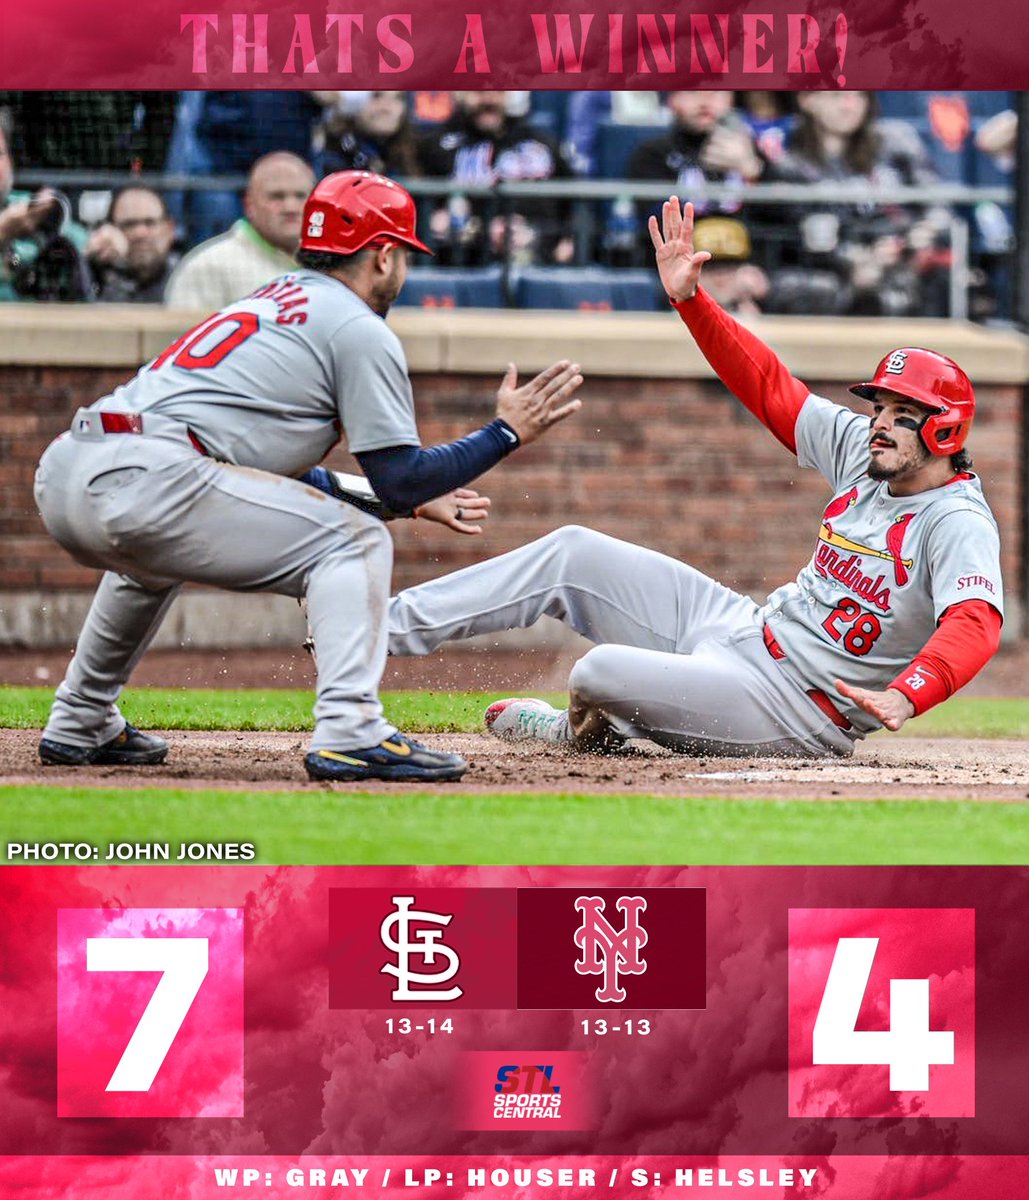 #THATSAWINNER! A four-run first inning and a quality start from Sonny Gray gives the #STLCards their second consecutive series victory! Lynn gets the start at 12:40 PM tomorrow as St. Louis goes for the sweep